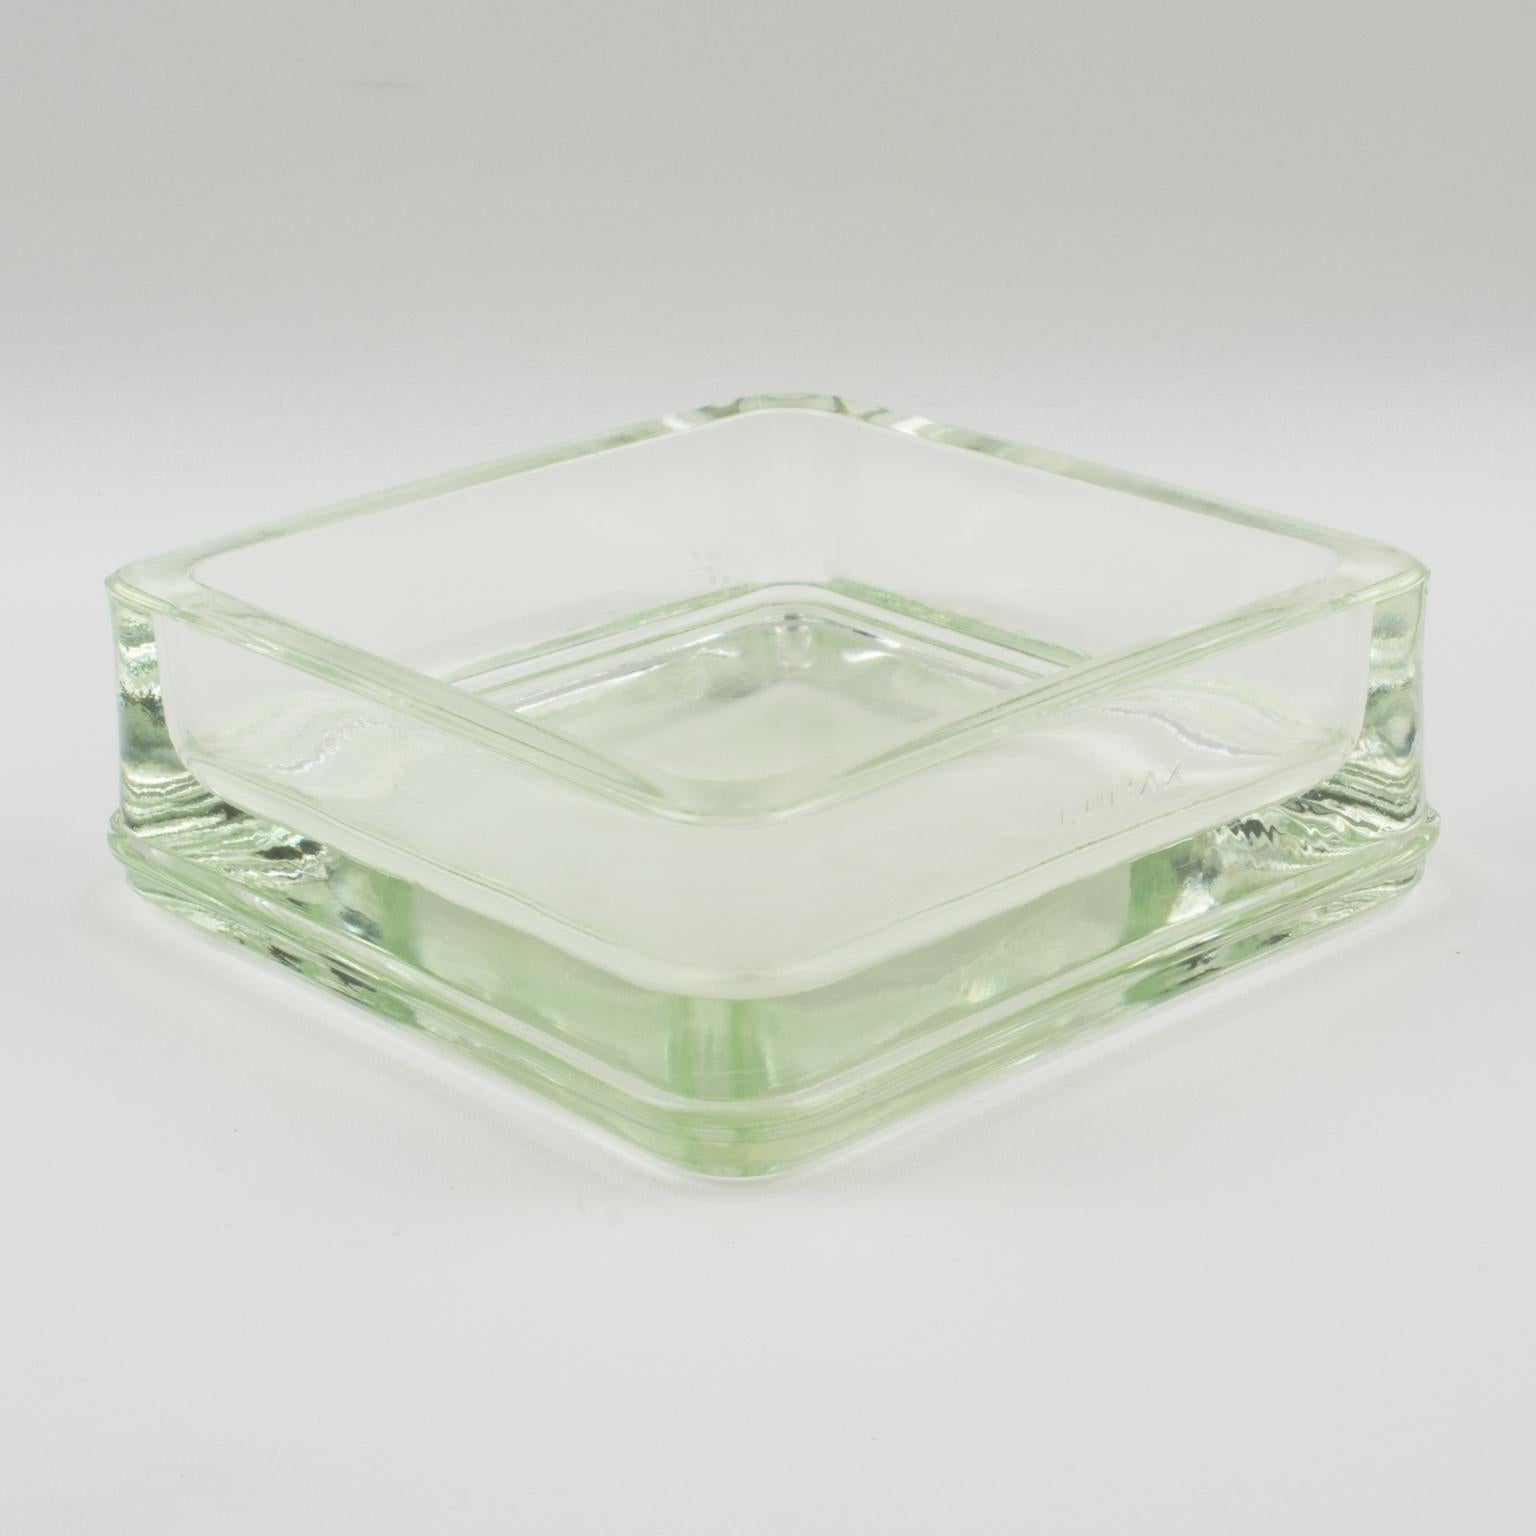 Mid-Century Modern Le Corbusier for Lumax Molded Glass Ashtray Catchall